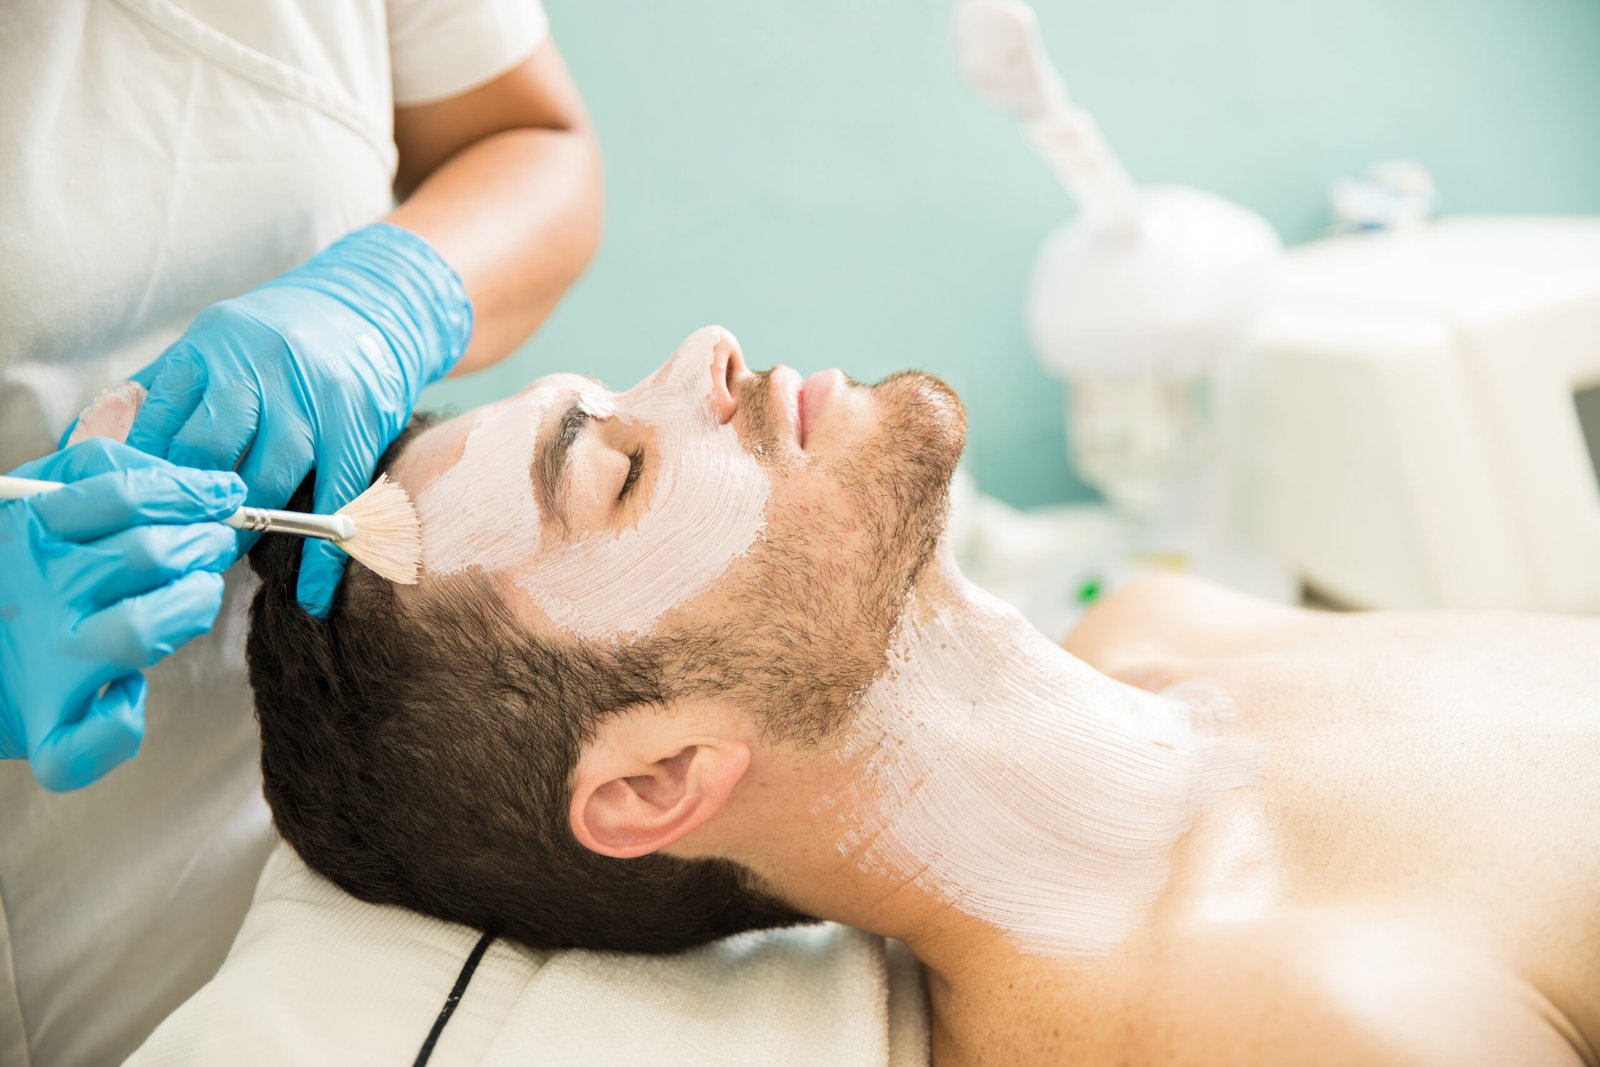 Profile view of a young man getting a moisturizing facial treatment in a health spa